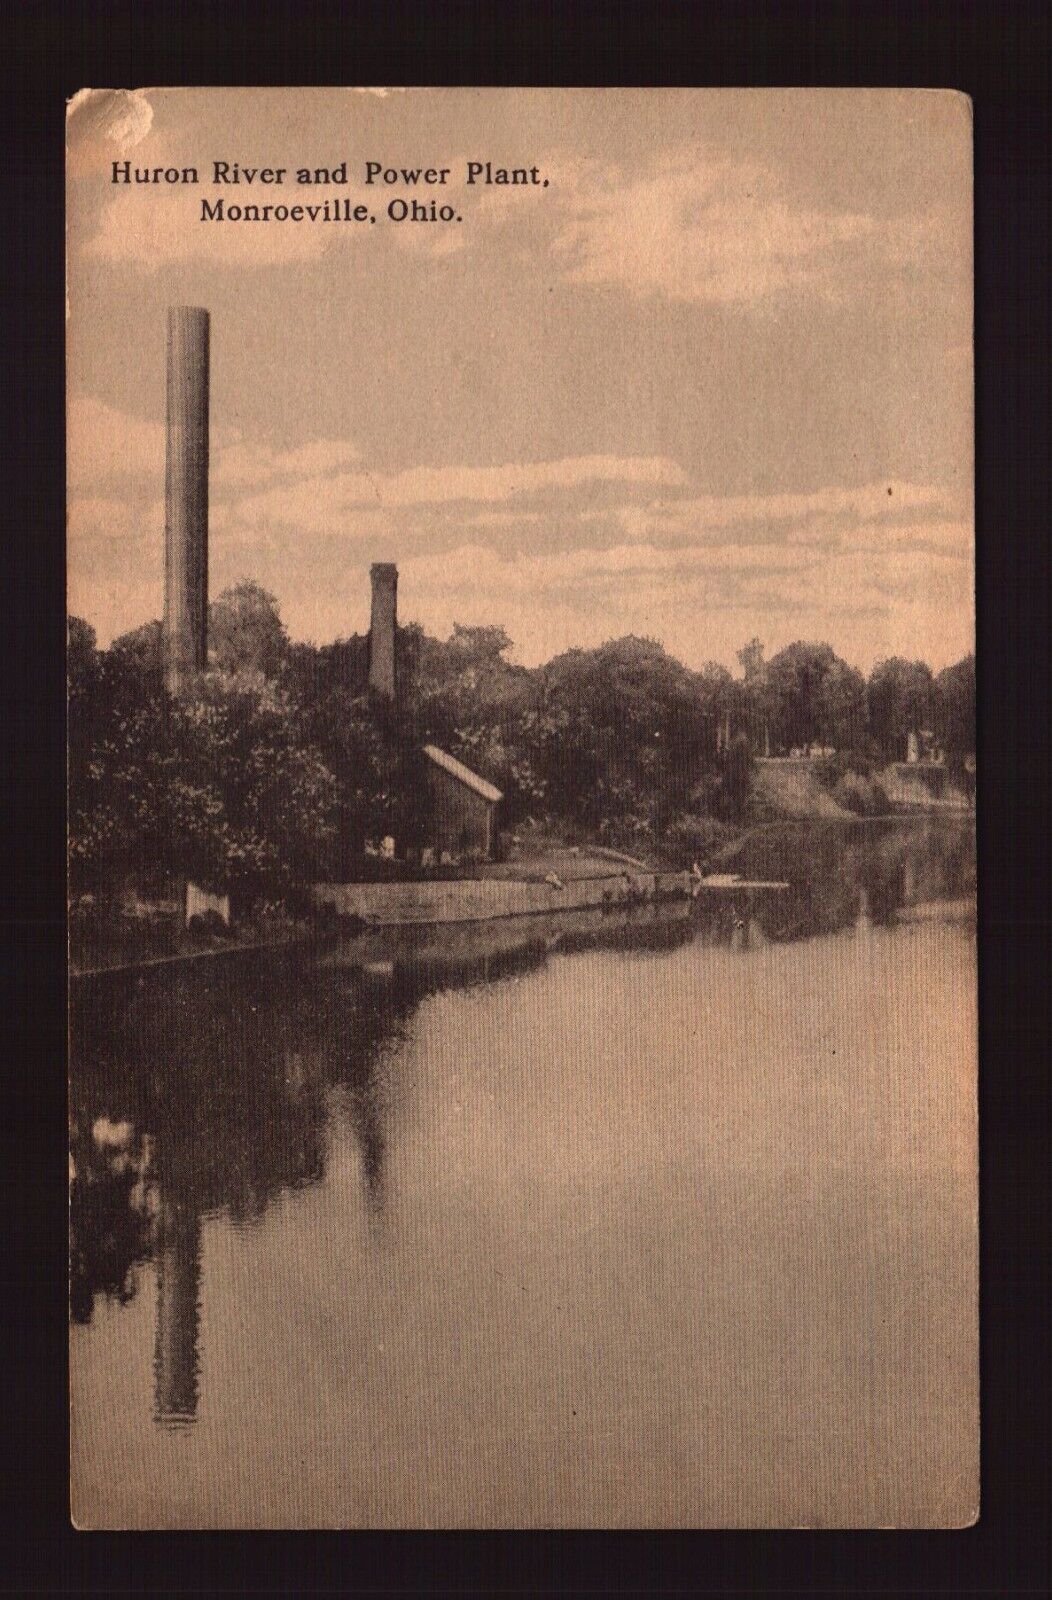 POSTCARD : OHIO - MONROEVILLE OH - HURON RIVER AND POWER PLANT 1930 VIEW